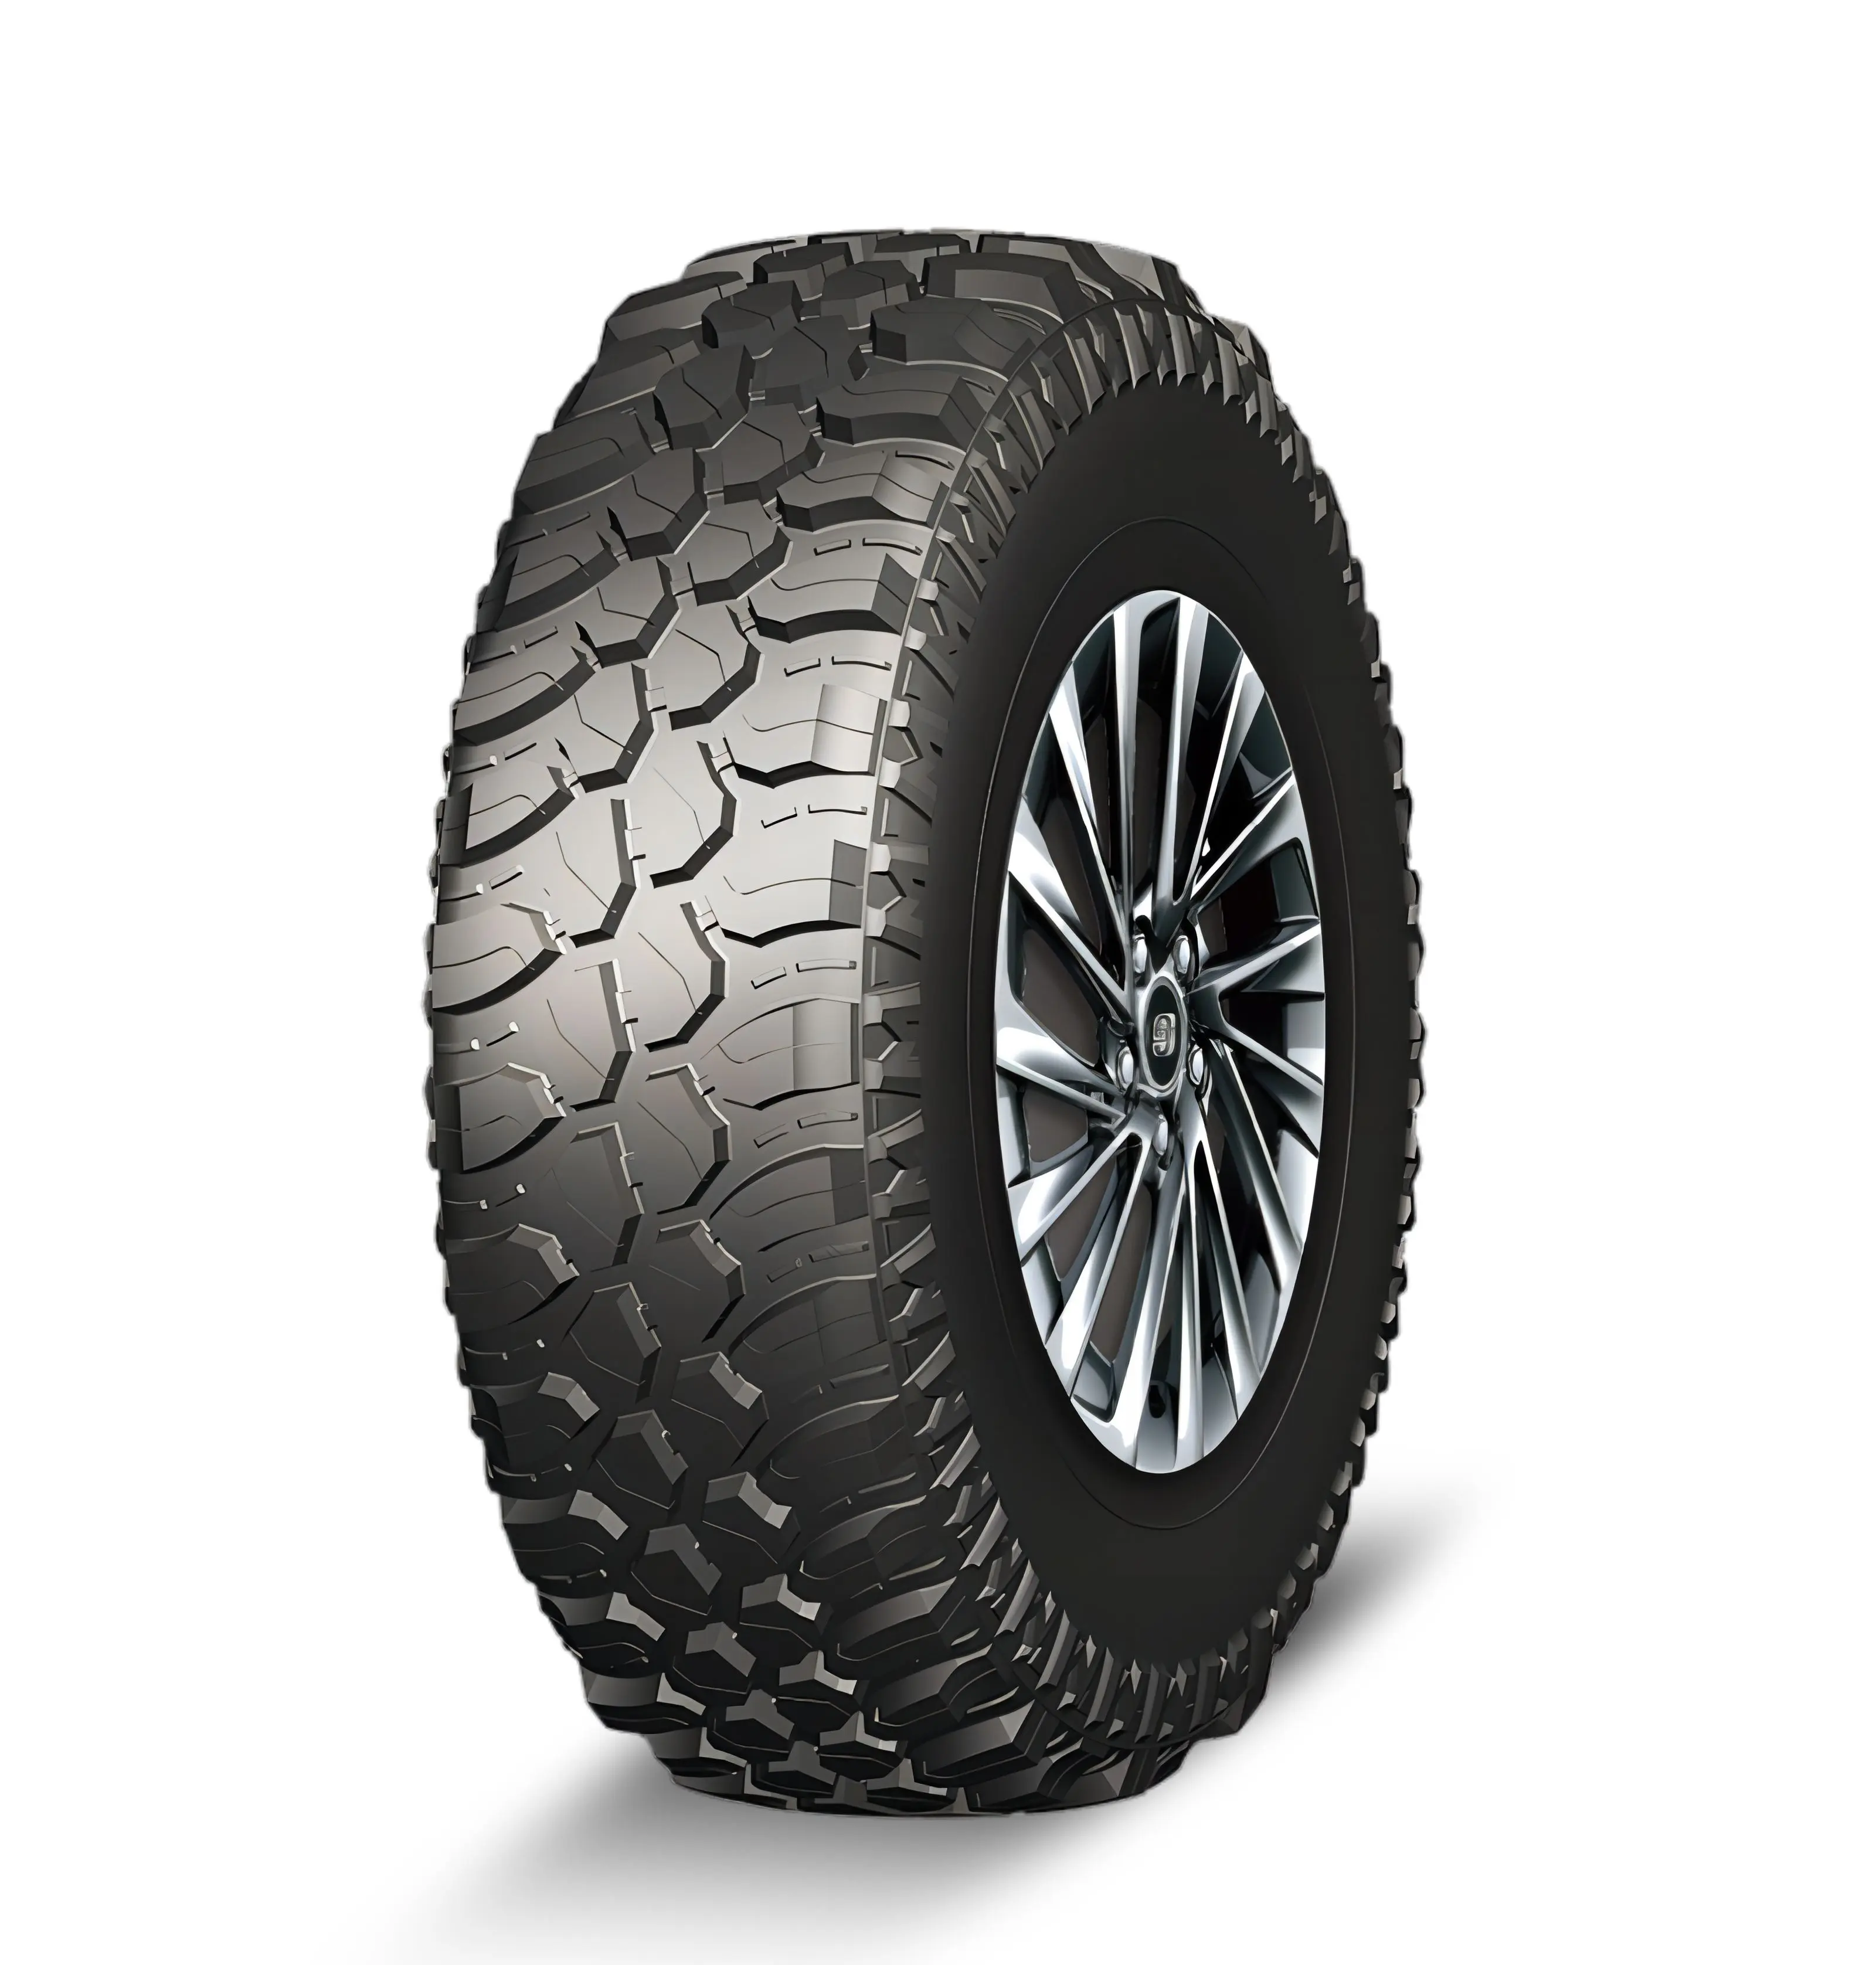 Classic Pattern AT MT Tyre 4x4 Offroad MT tire 31x10.50r15 265/65r17 285/75r16 Mud Terrain Tires for Cars